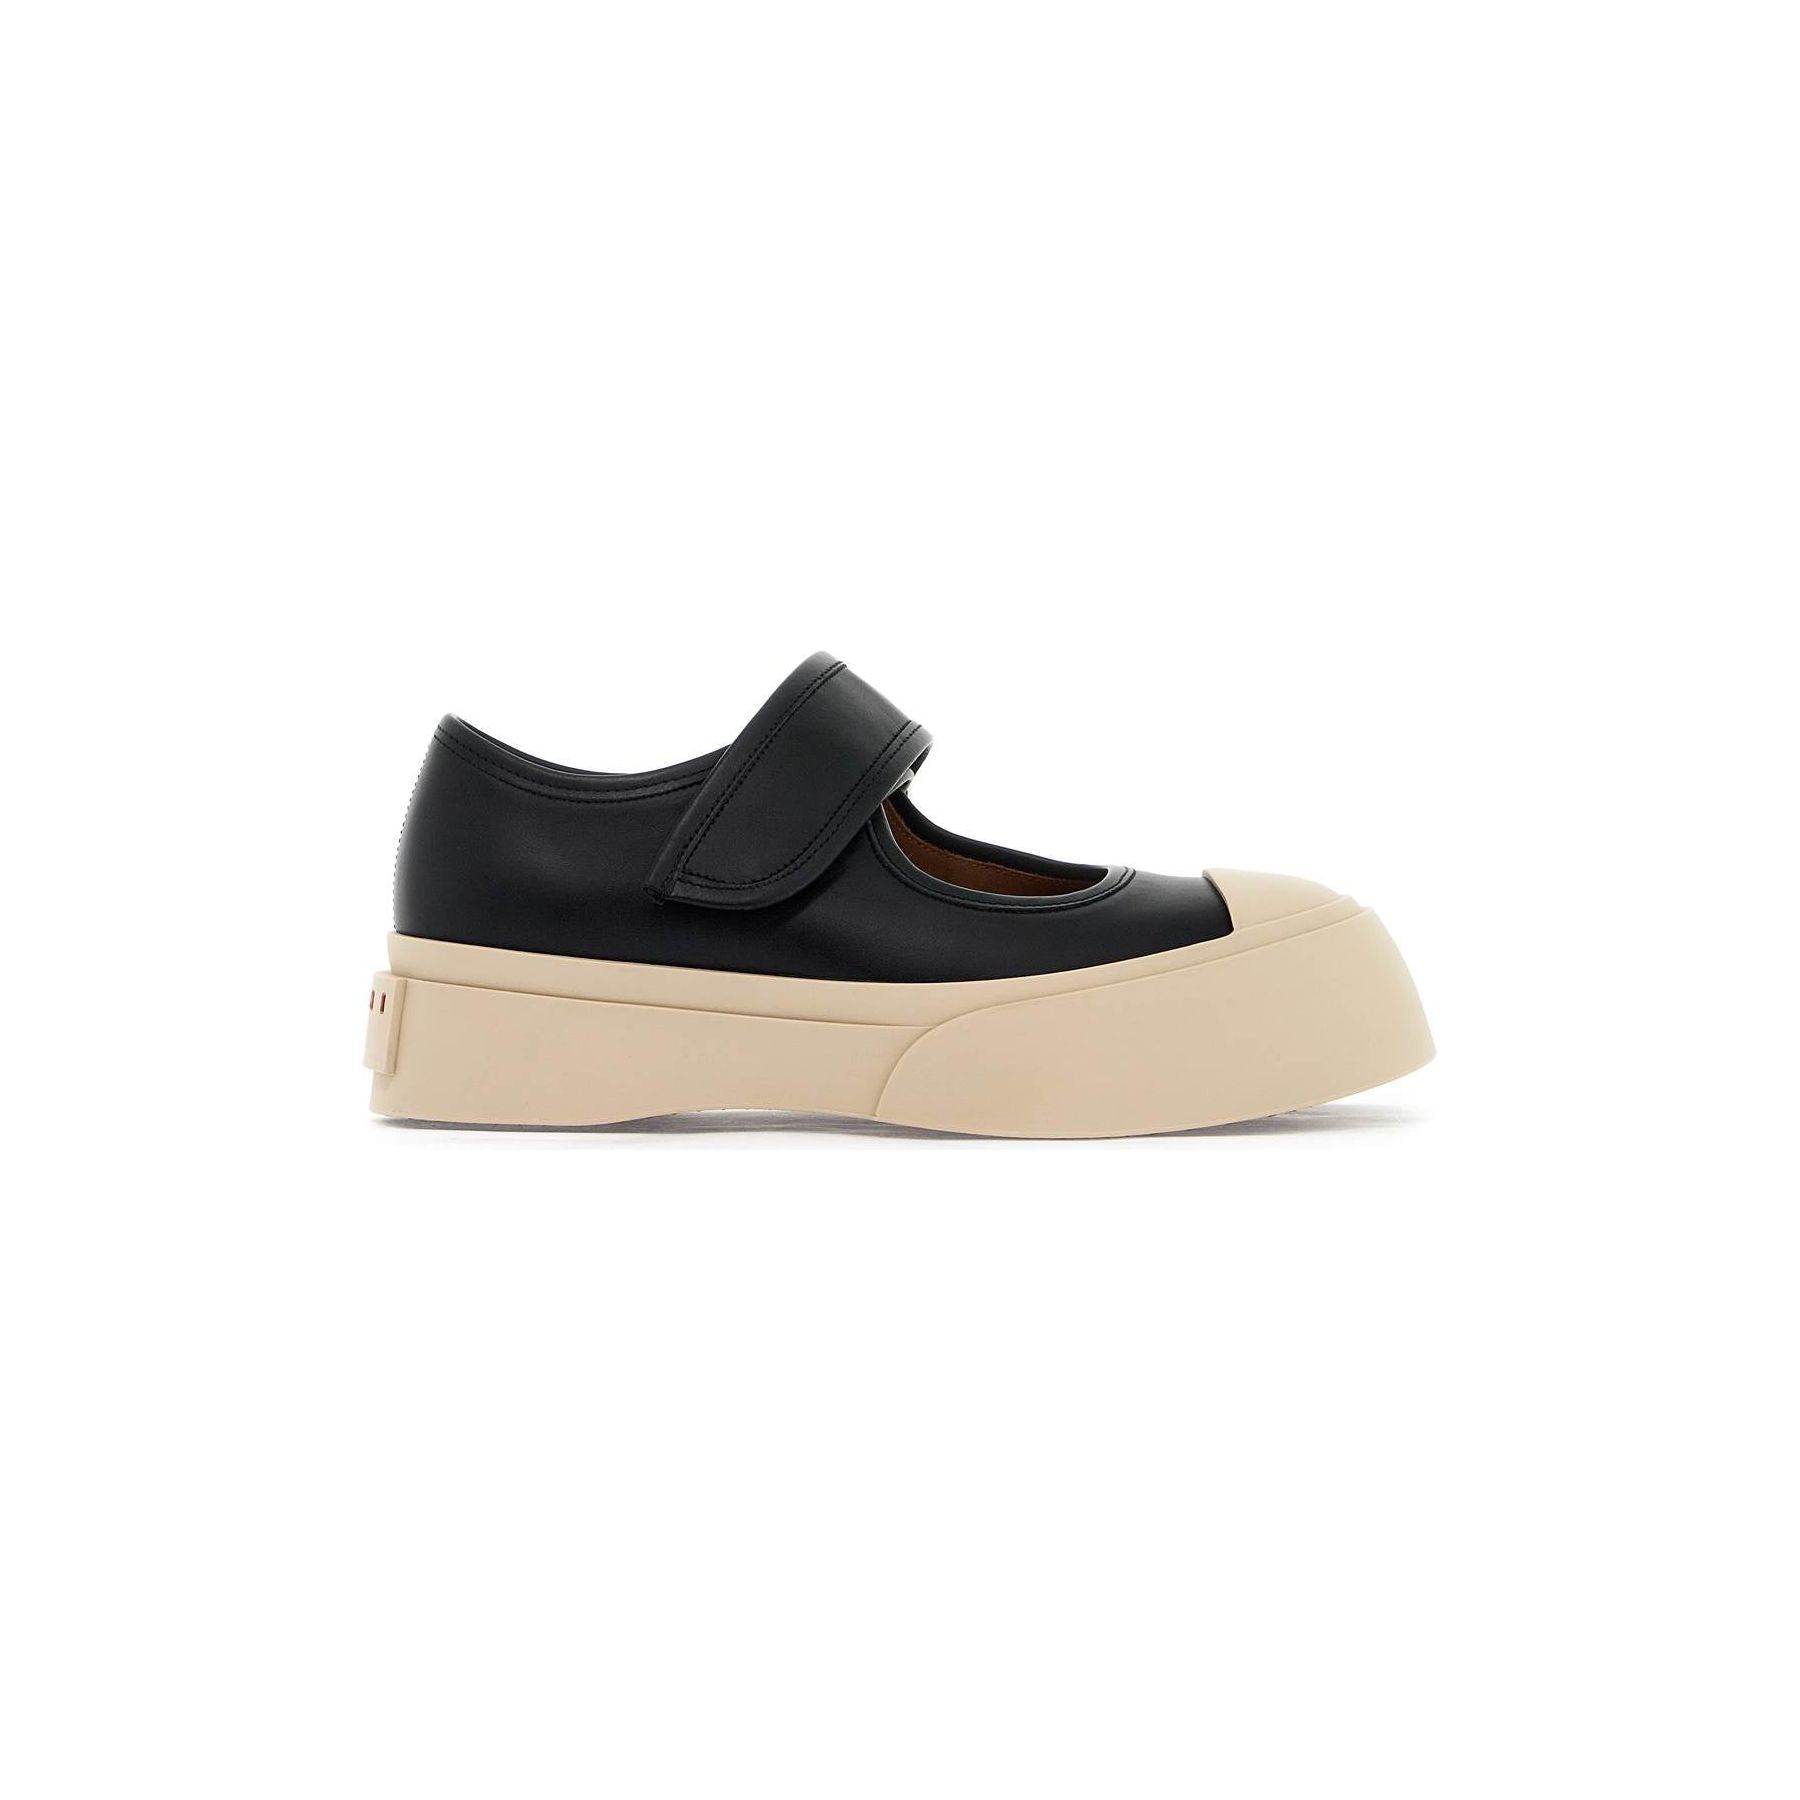 Pablo Mary Jane Nappa Leather Sneakers